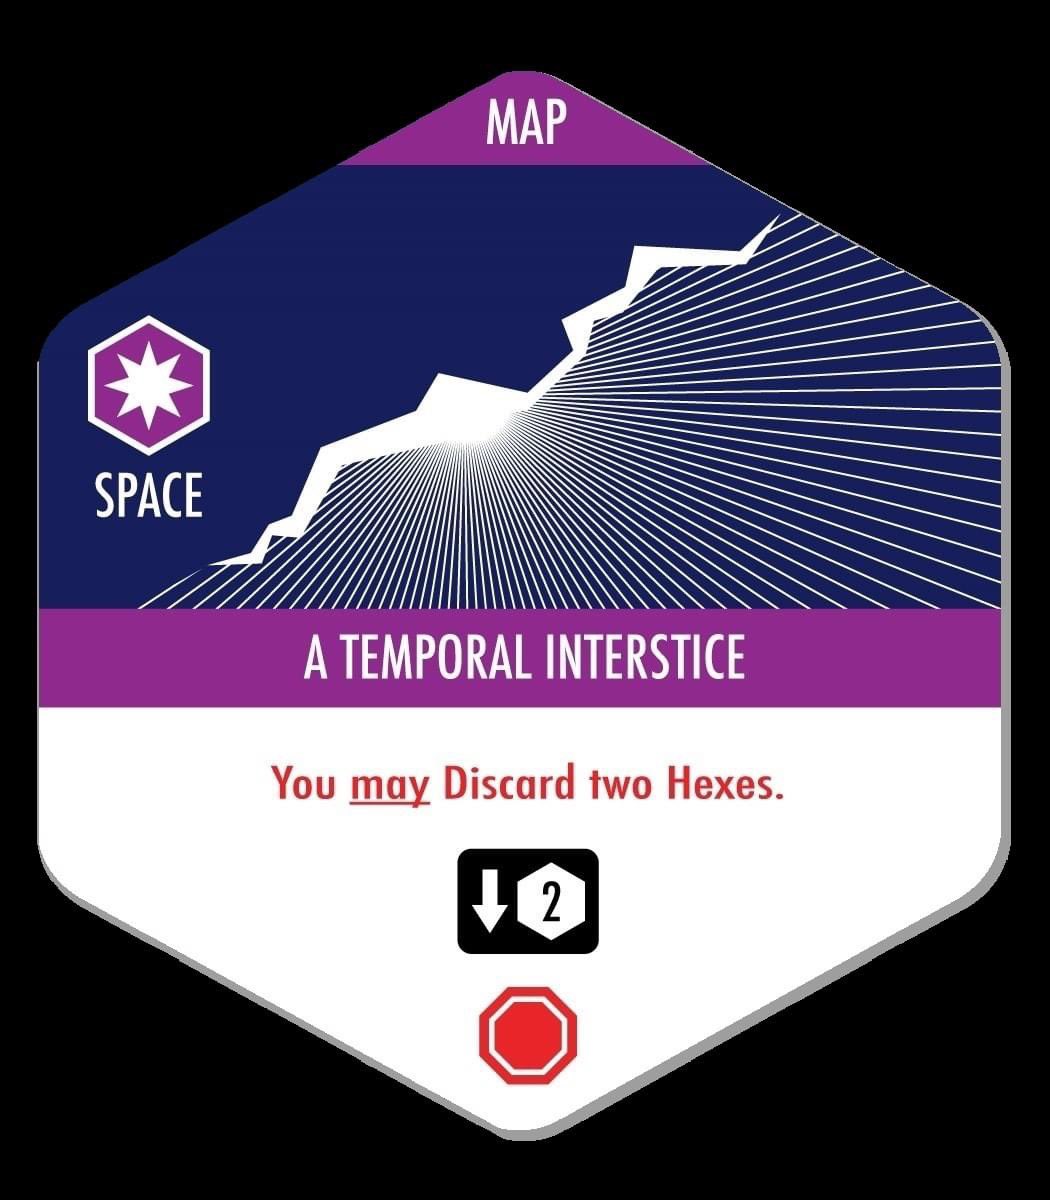 People ask where ideas for new cards come from. Players often ask if they can just discard cards. No, but the solution is here in “A Temporal Interstice'.
#gencon
#tabletop
#missiontoplanethexx
#spacegame #spacegames #bgg #boardgamegeek #tabletopgames #boardgame #moverate20games